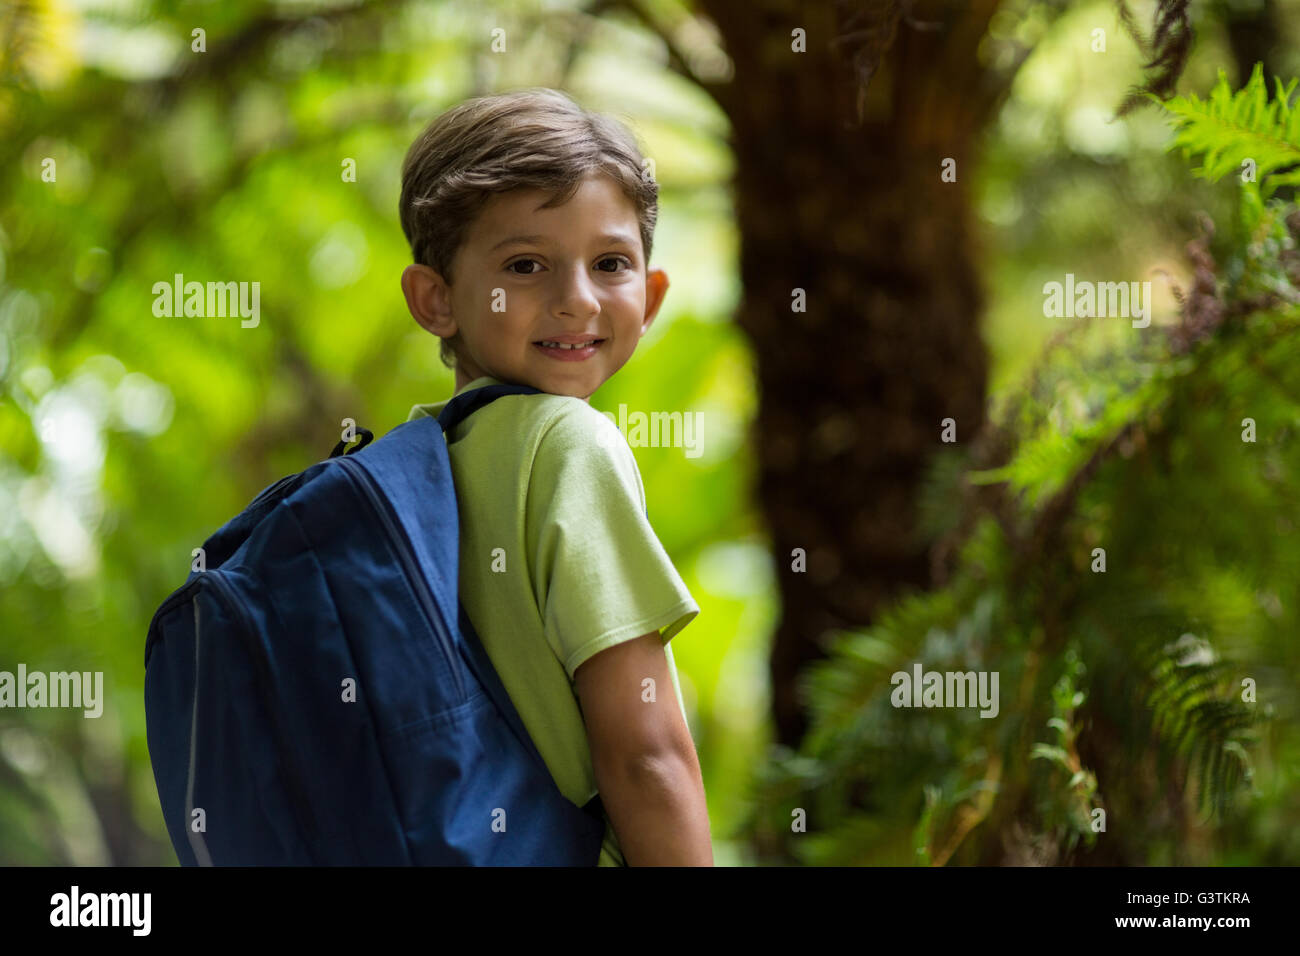 Smiling boy standing in forest Banque D'Images